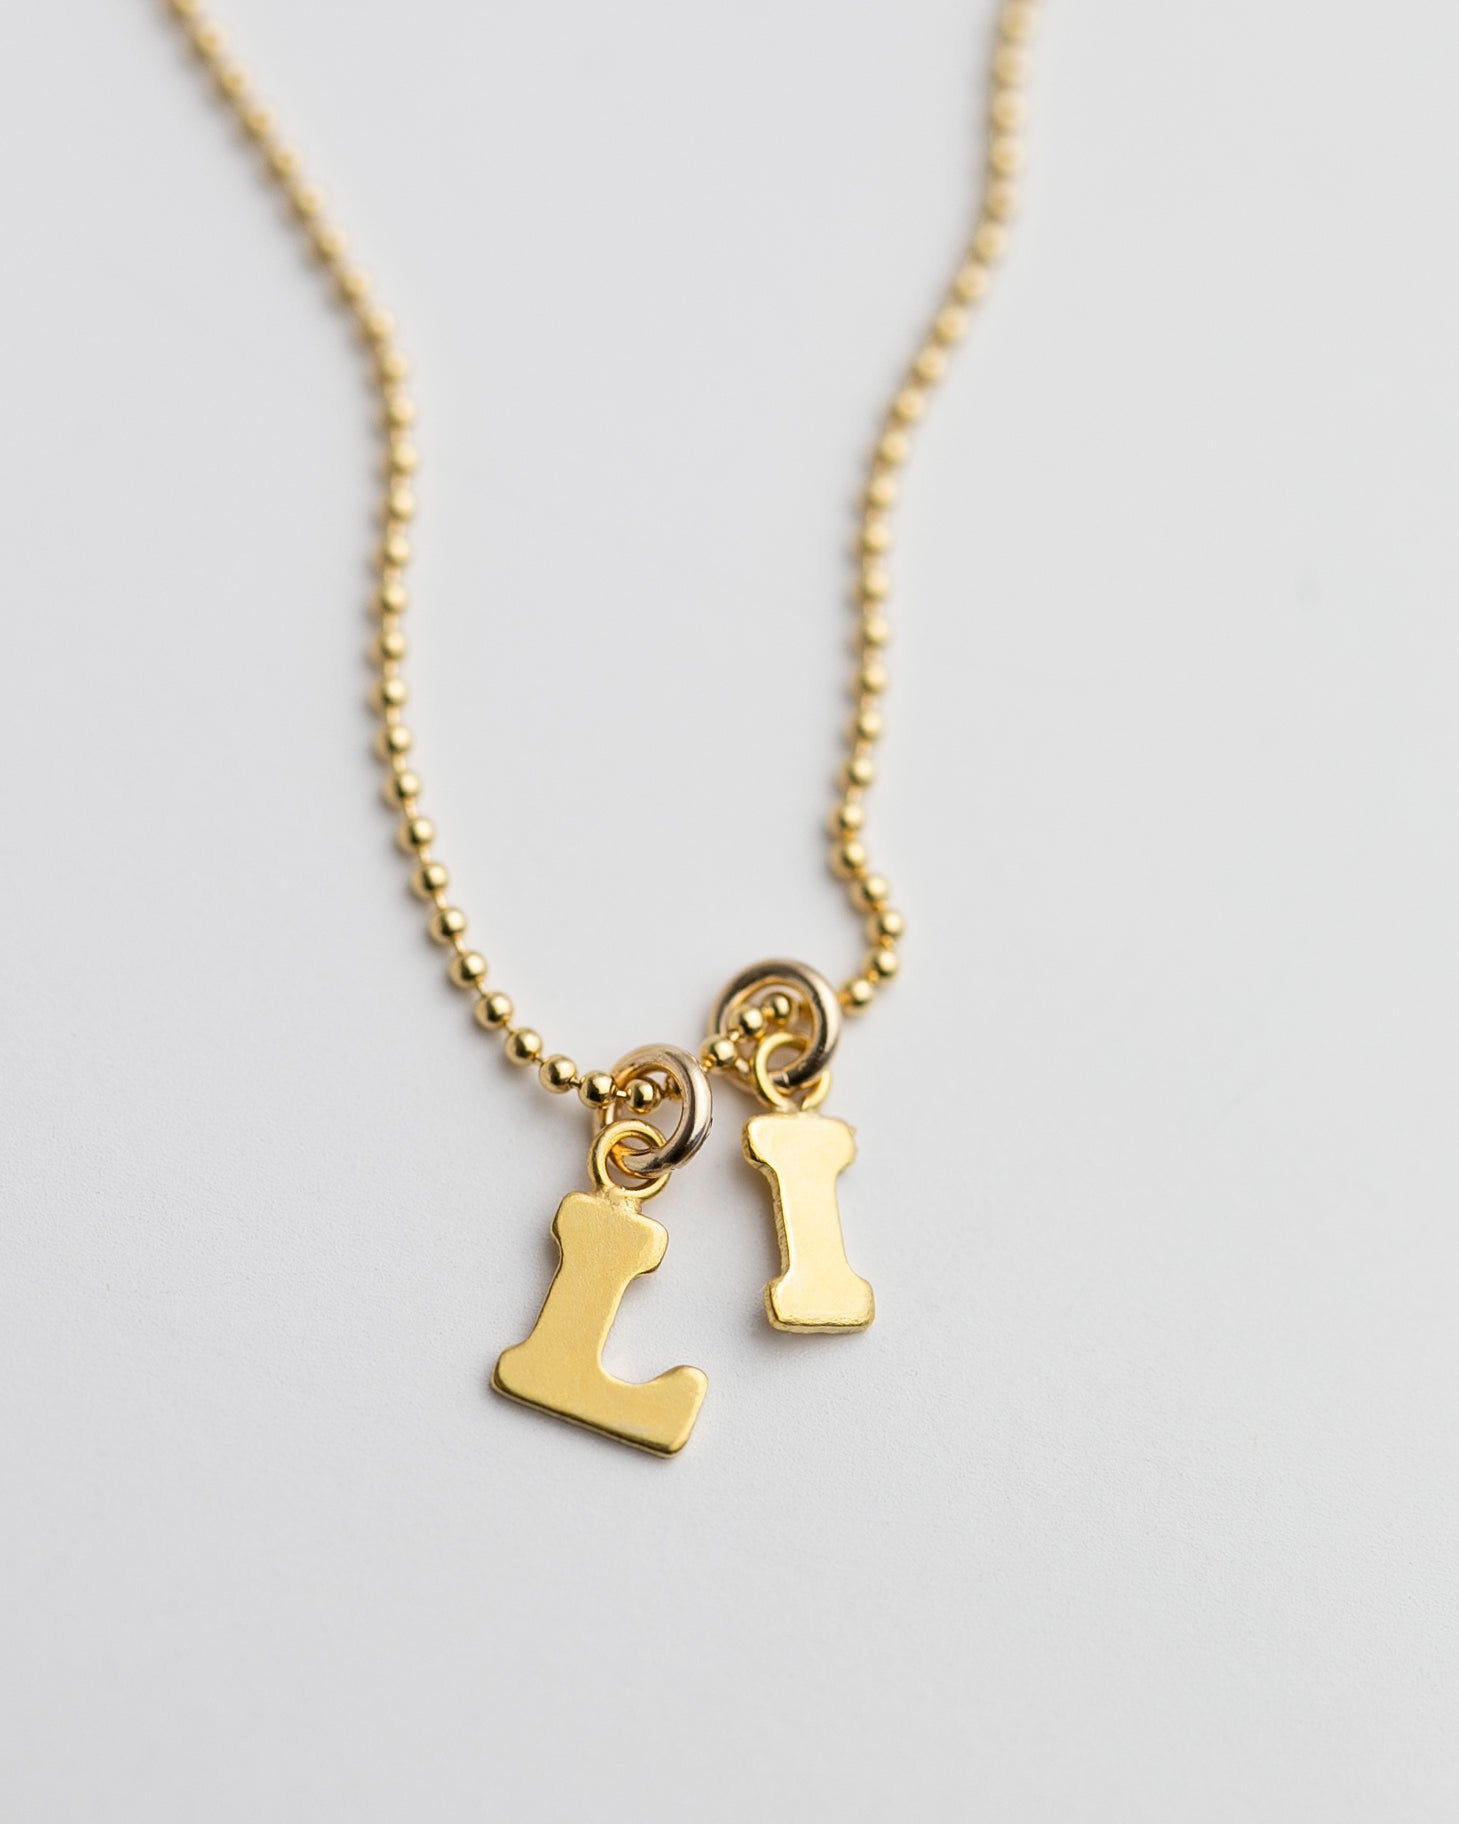 Gold Plated Bamboo Initial Necklace 300-4 | Erika Williner Designs